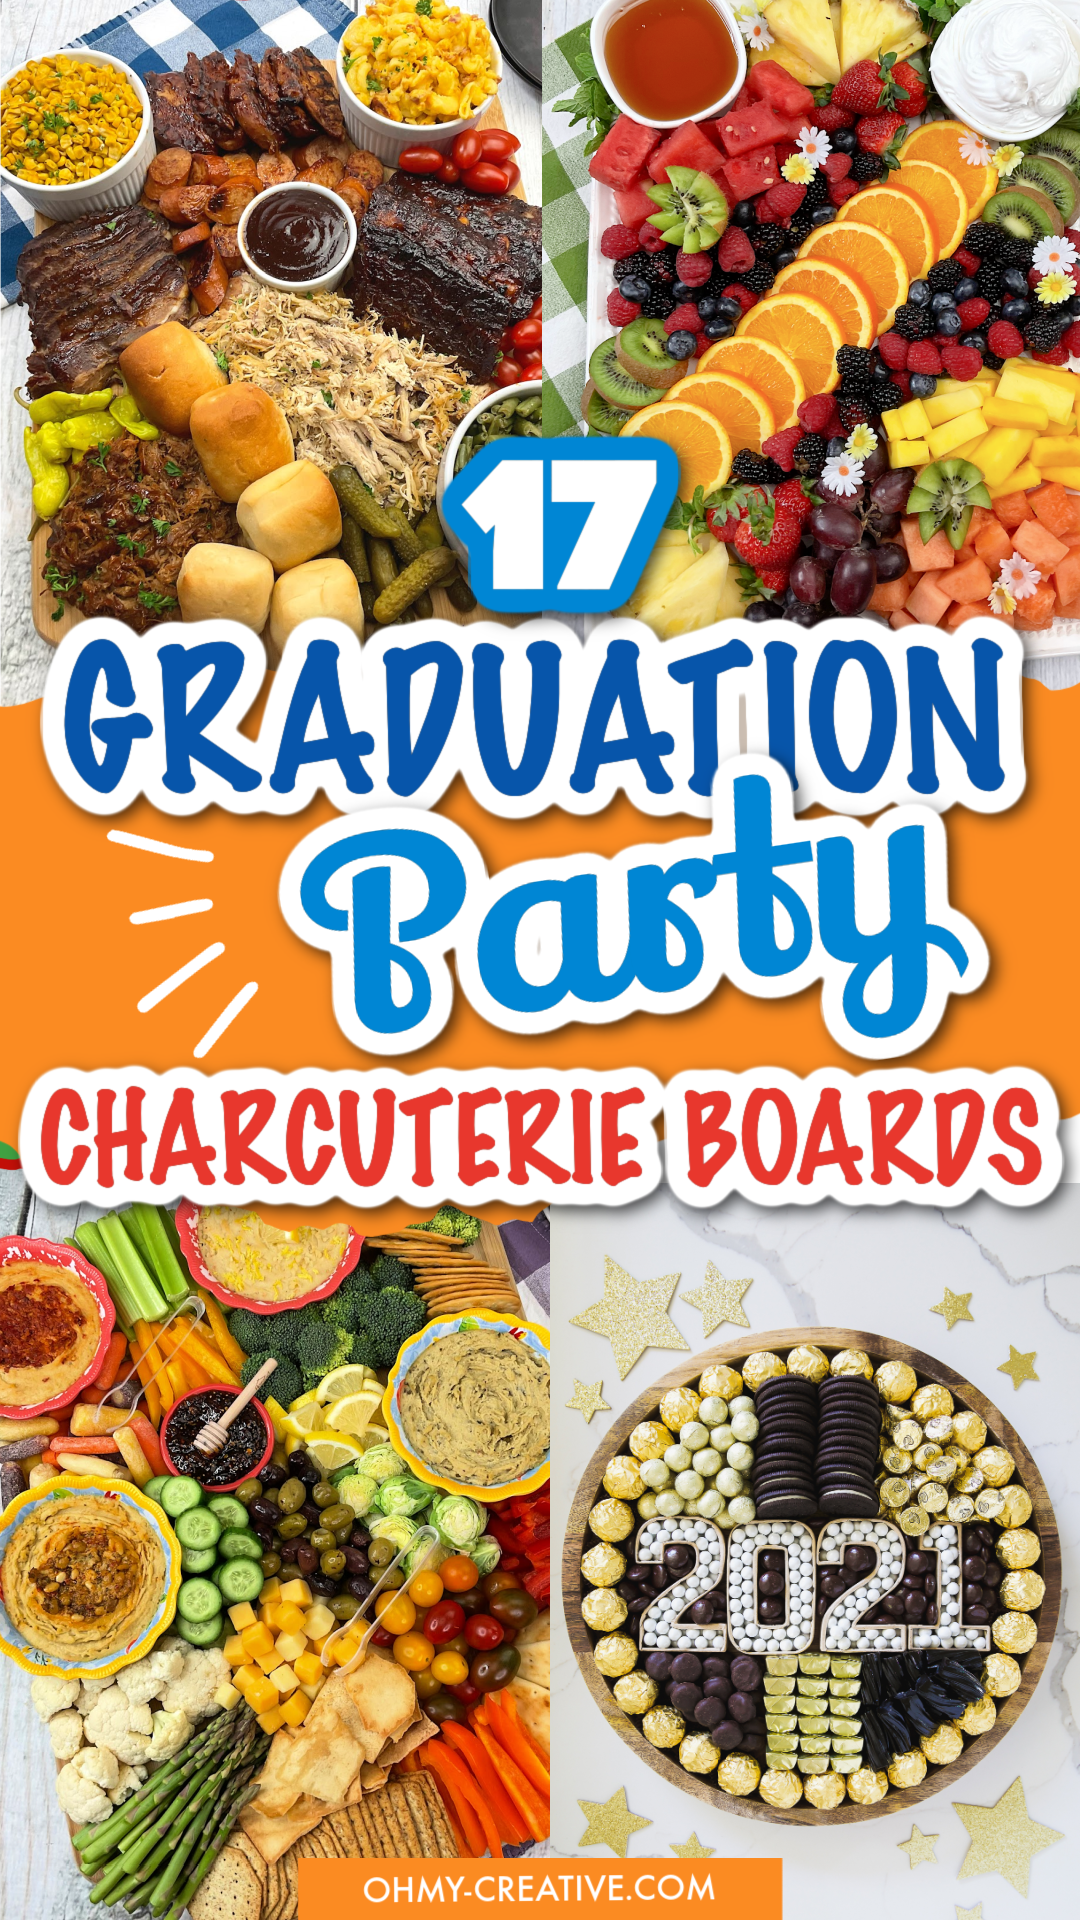 a pin collage of graduation party charcuterie boards including dessert and savory charcuterie trays.